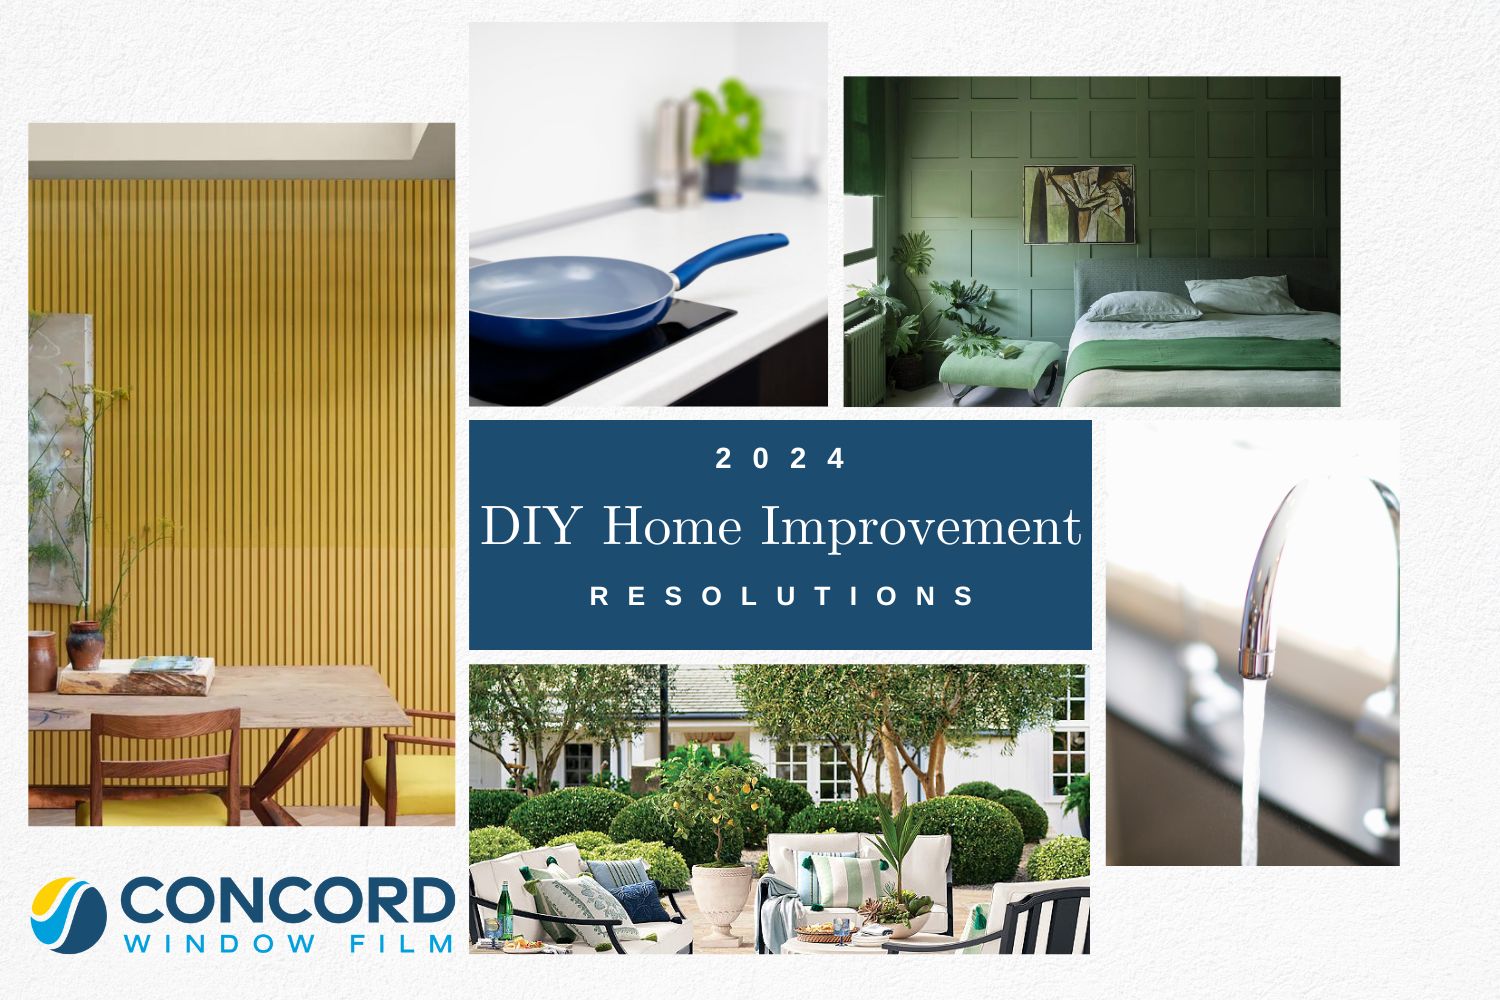 Collage of images representing 2024 DIY Home Improvement Resolutions